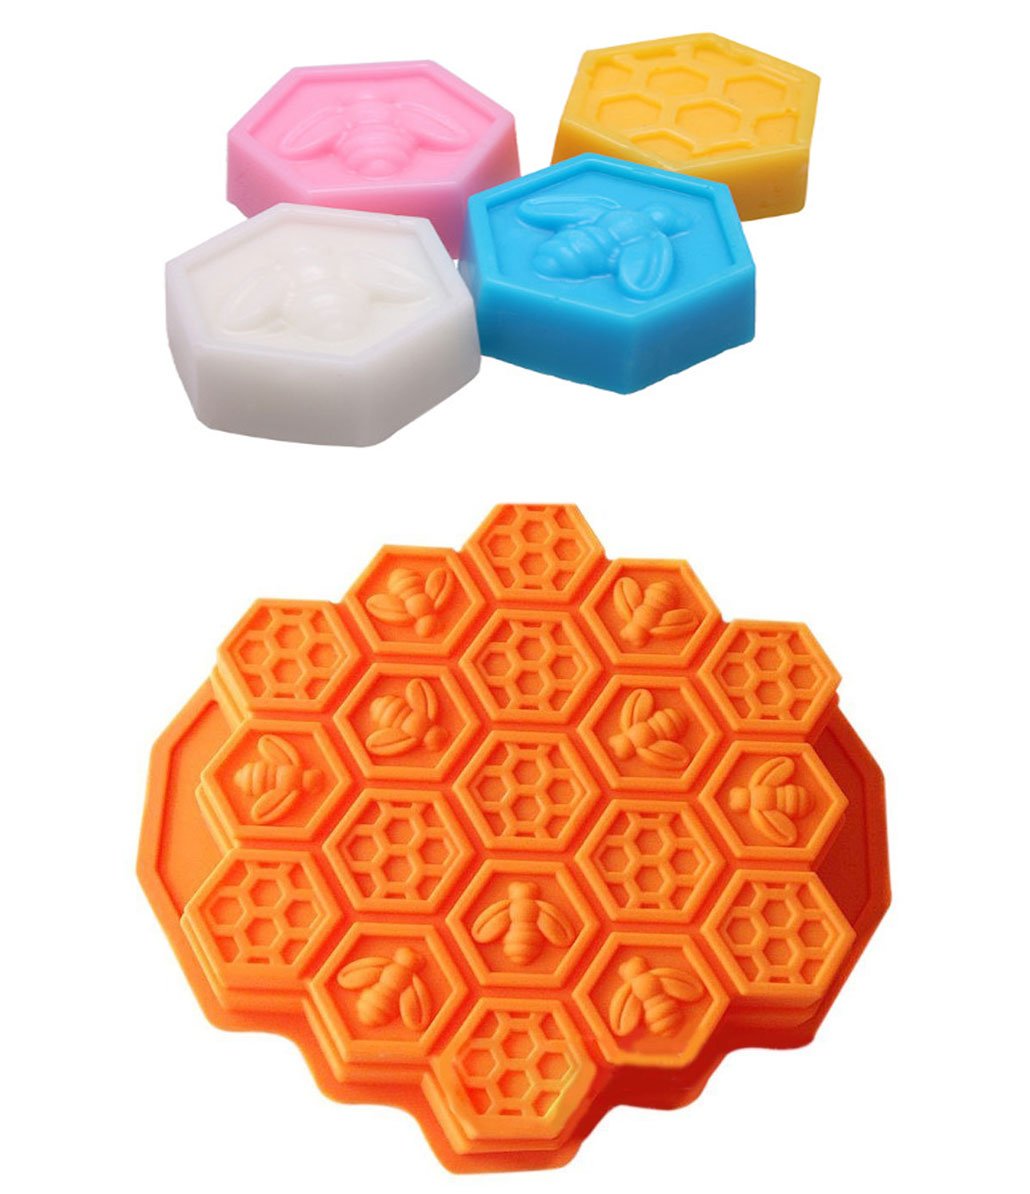 KISEER Large Honeycomb Silicone Soap Mold | 19-Hole Baking Cake Mold Bakeware for Family or Friends Party (Orange, 12-Inch)